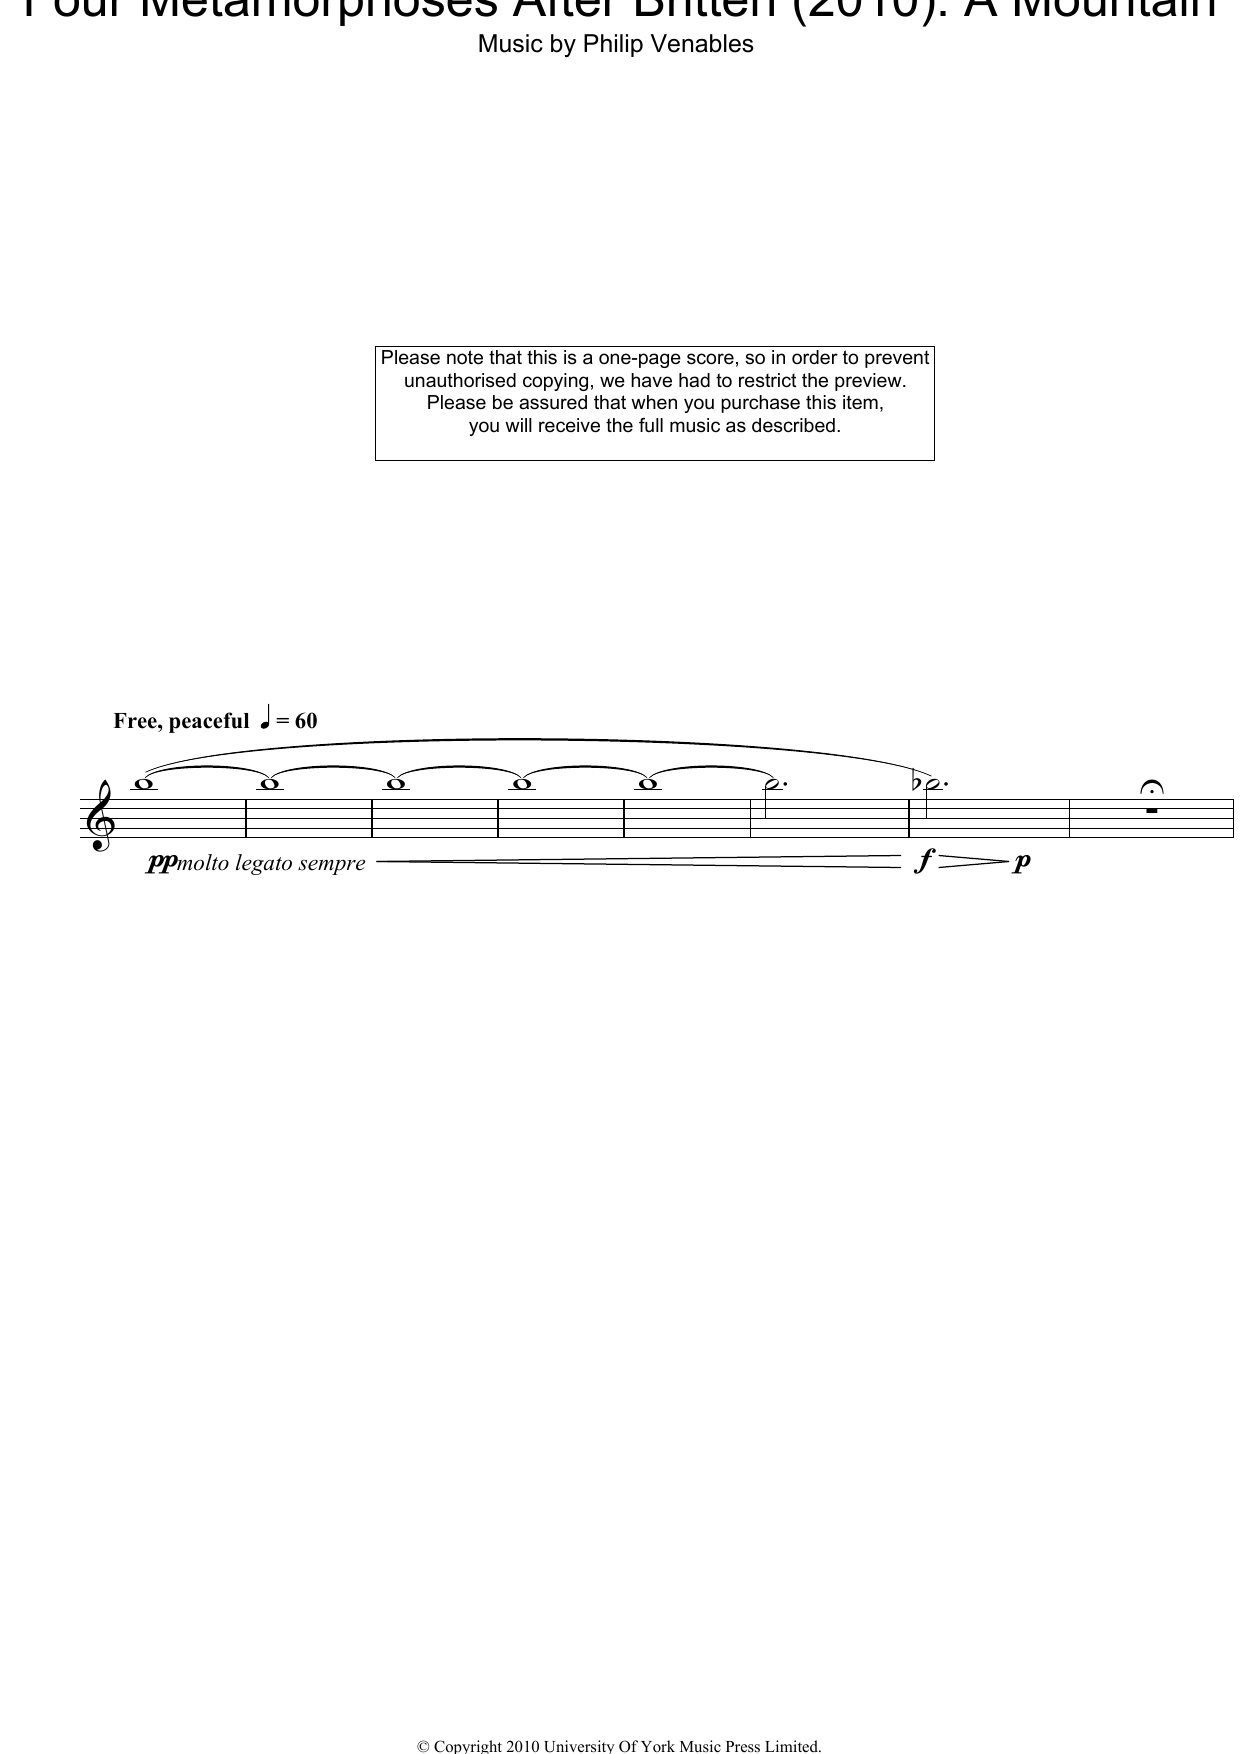 Philip Venables Four Metamorphoses After Britten (2010): A Mountain sheet music notes and chords arranged for Oboe Solo